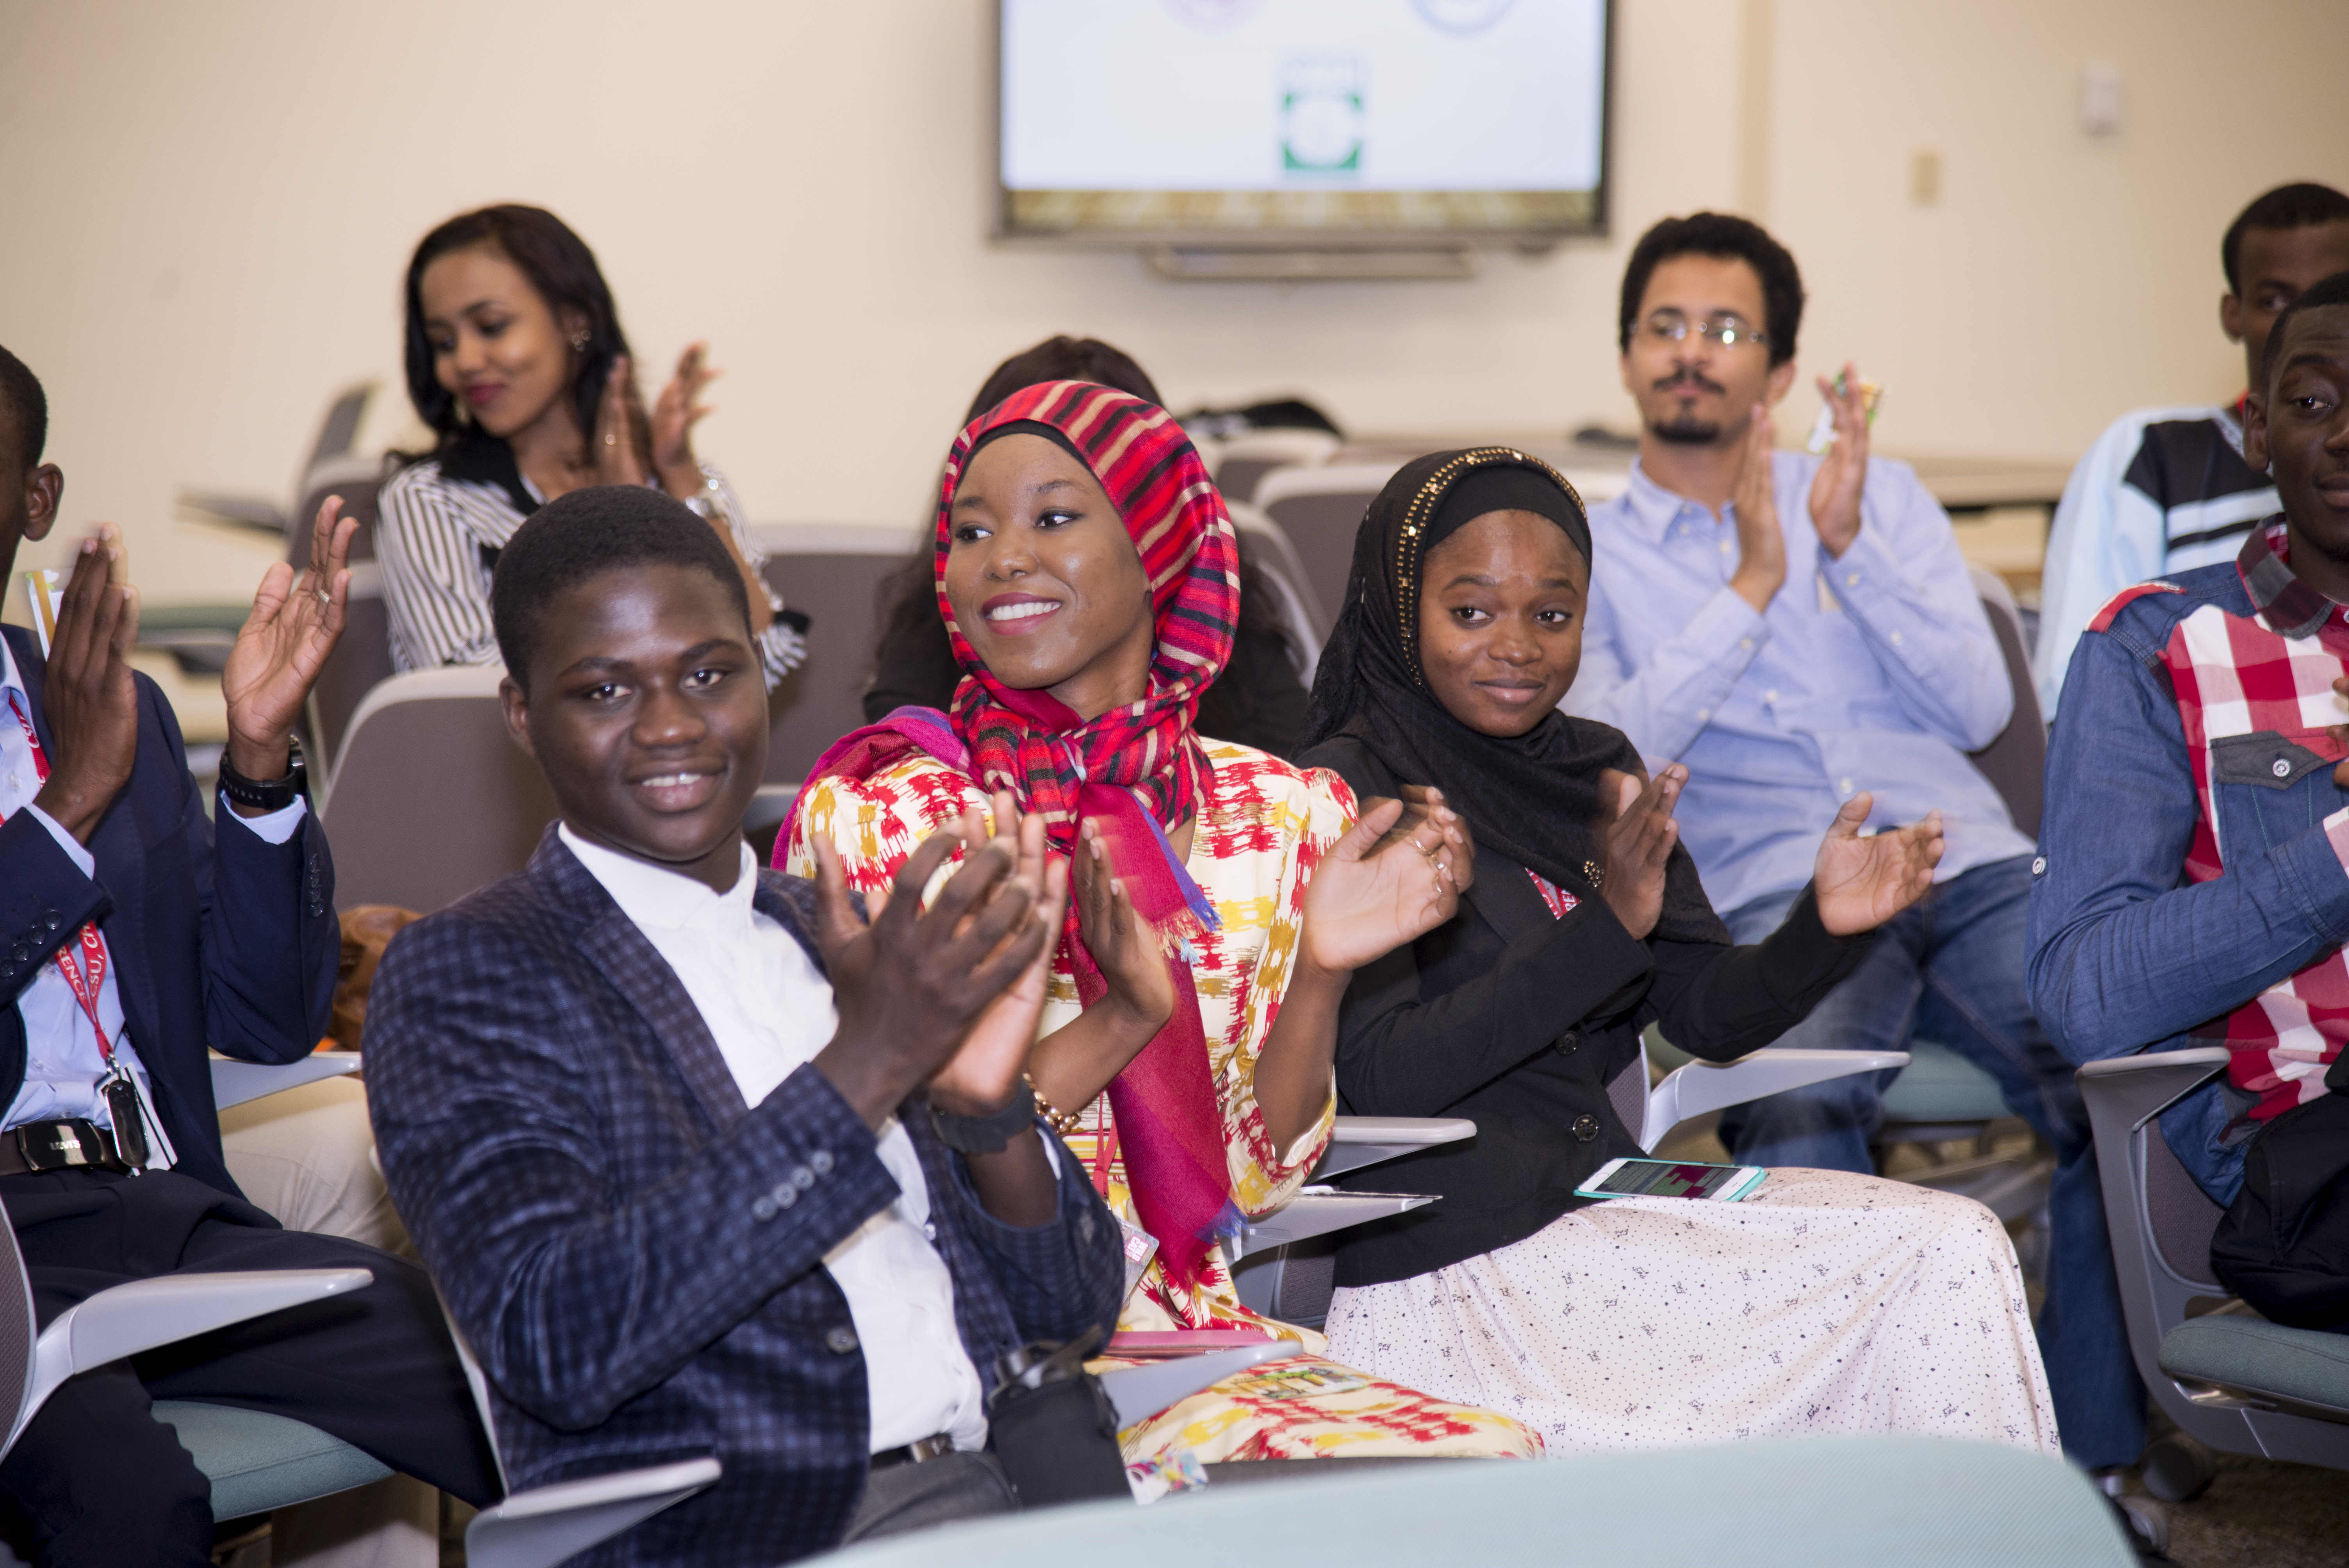 The Entrepreneurship Boot Camp's final presentation for students from Africa in Tehama room 116 on Monday, August 1, 2016 (Jessica Bartlett/Student Photographer)